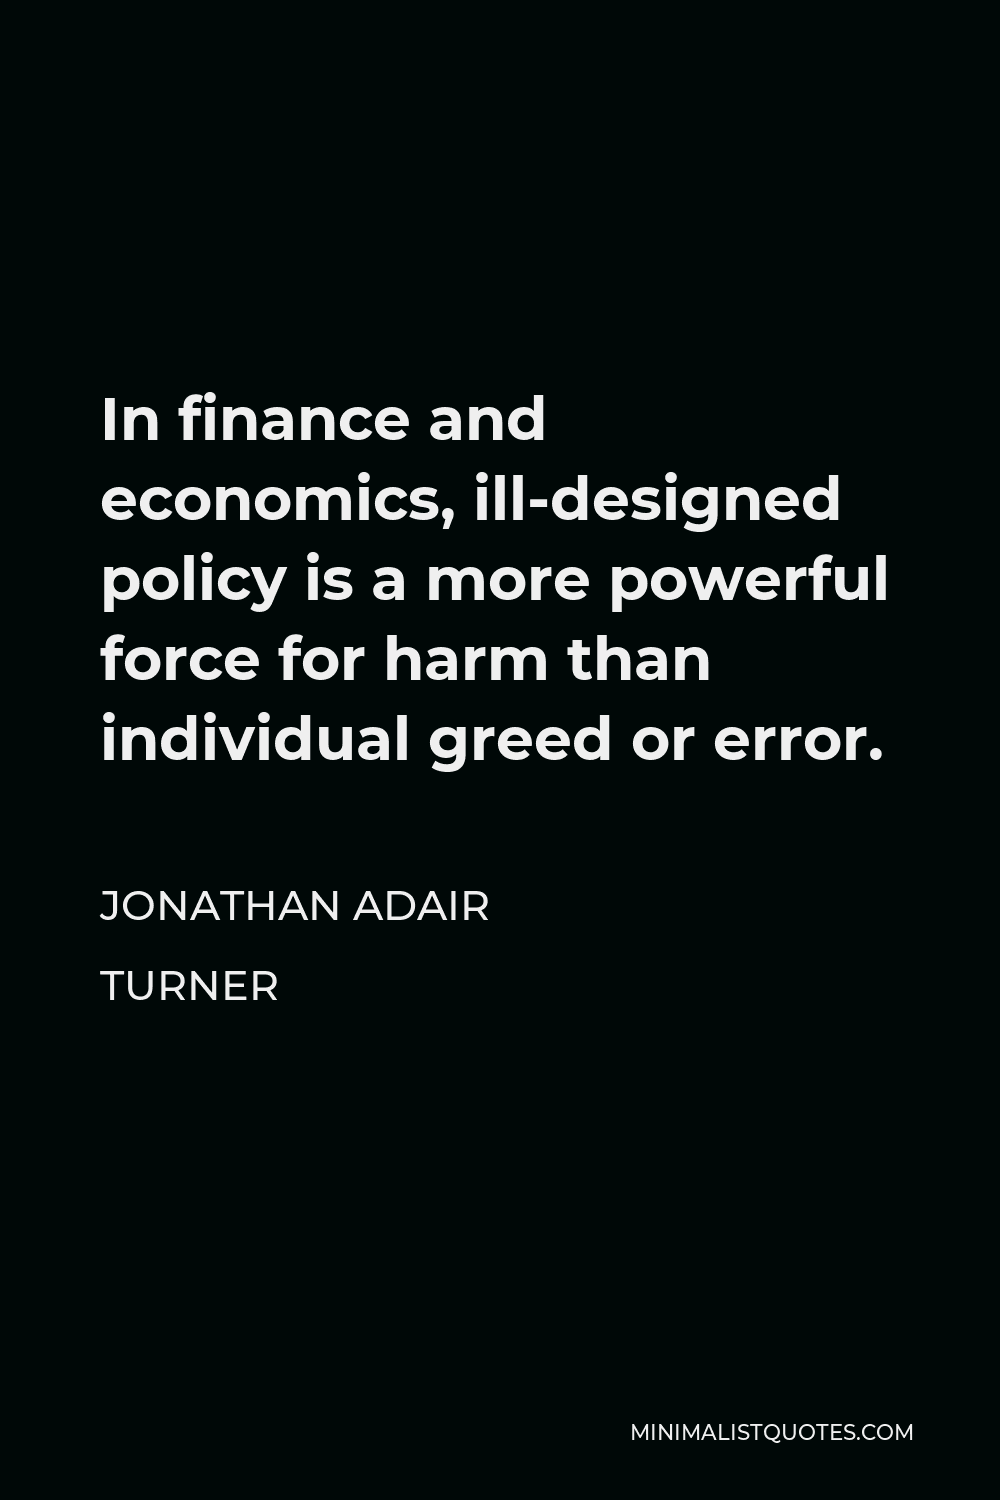 Jonathan Adair Turner Quote - In finance and economics, ill-designed policy is a more powerful force for harm than individual greed or error.